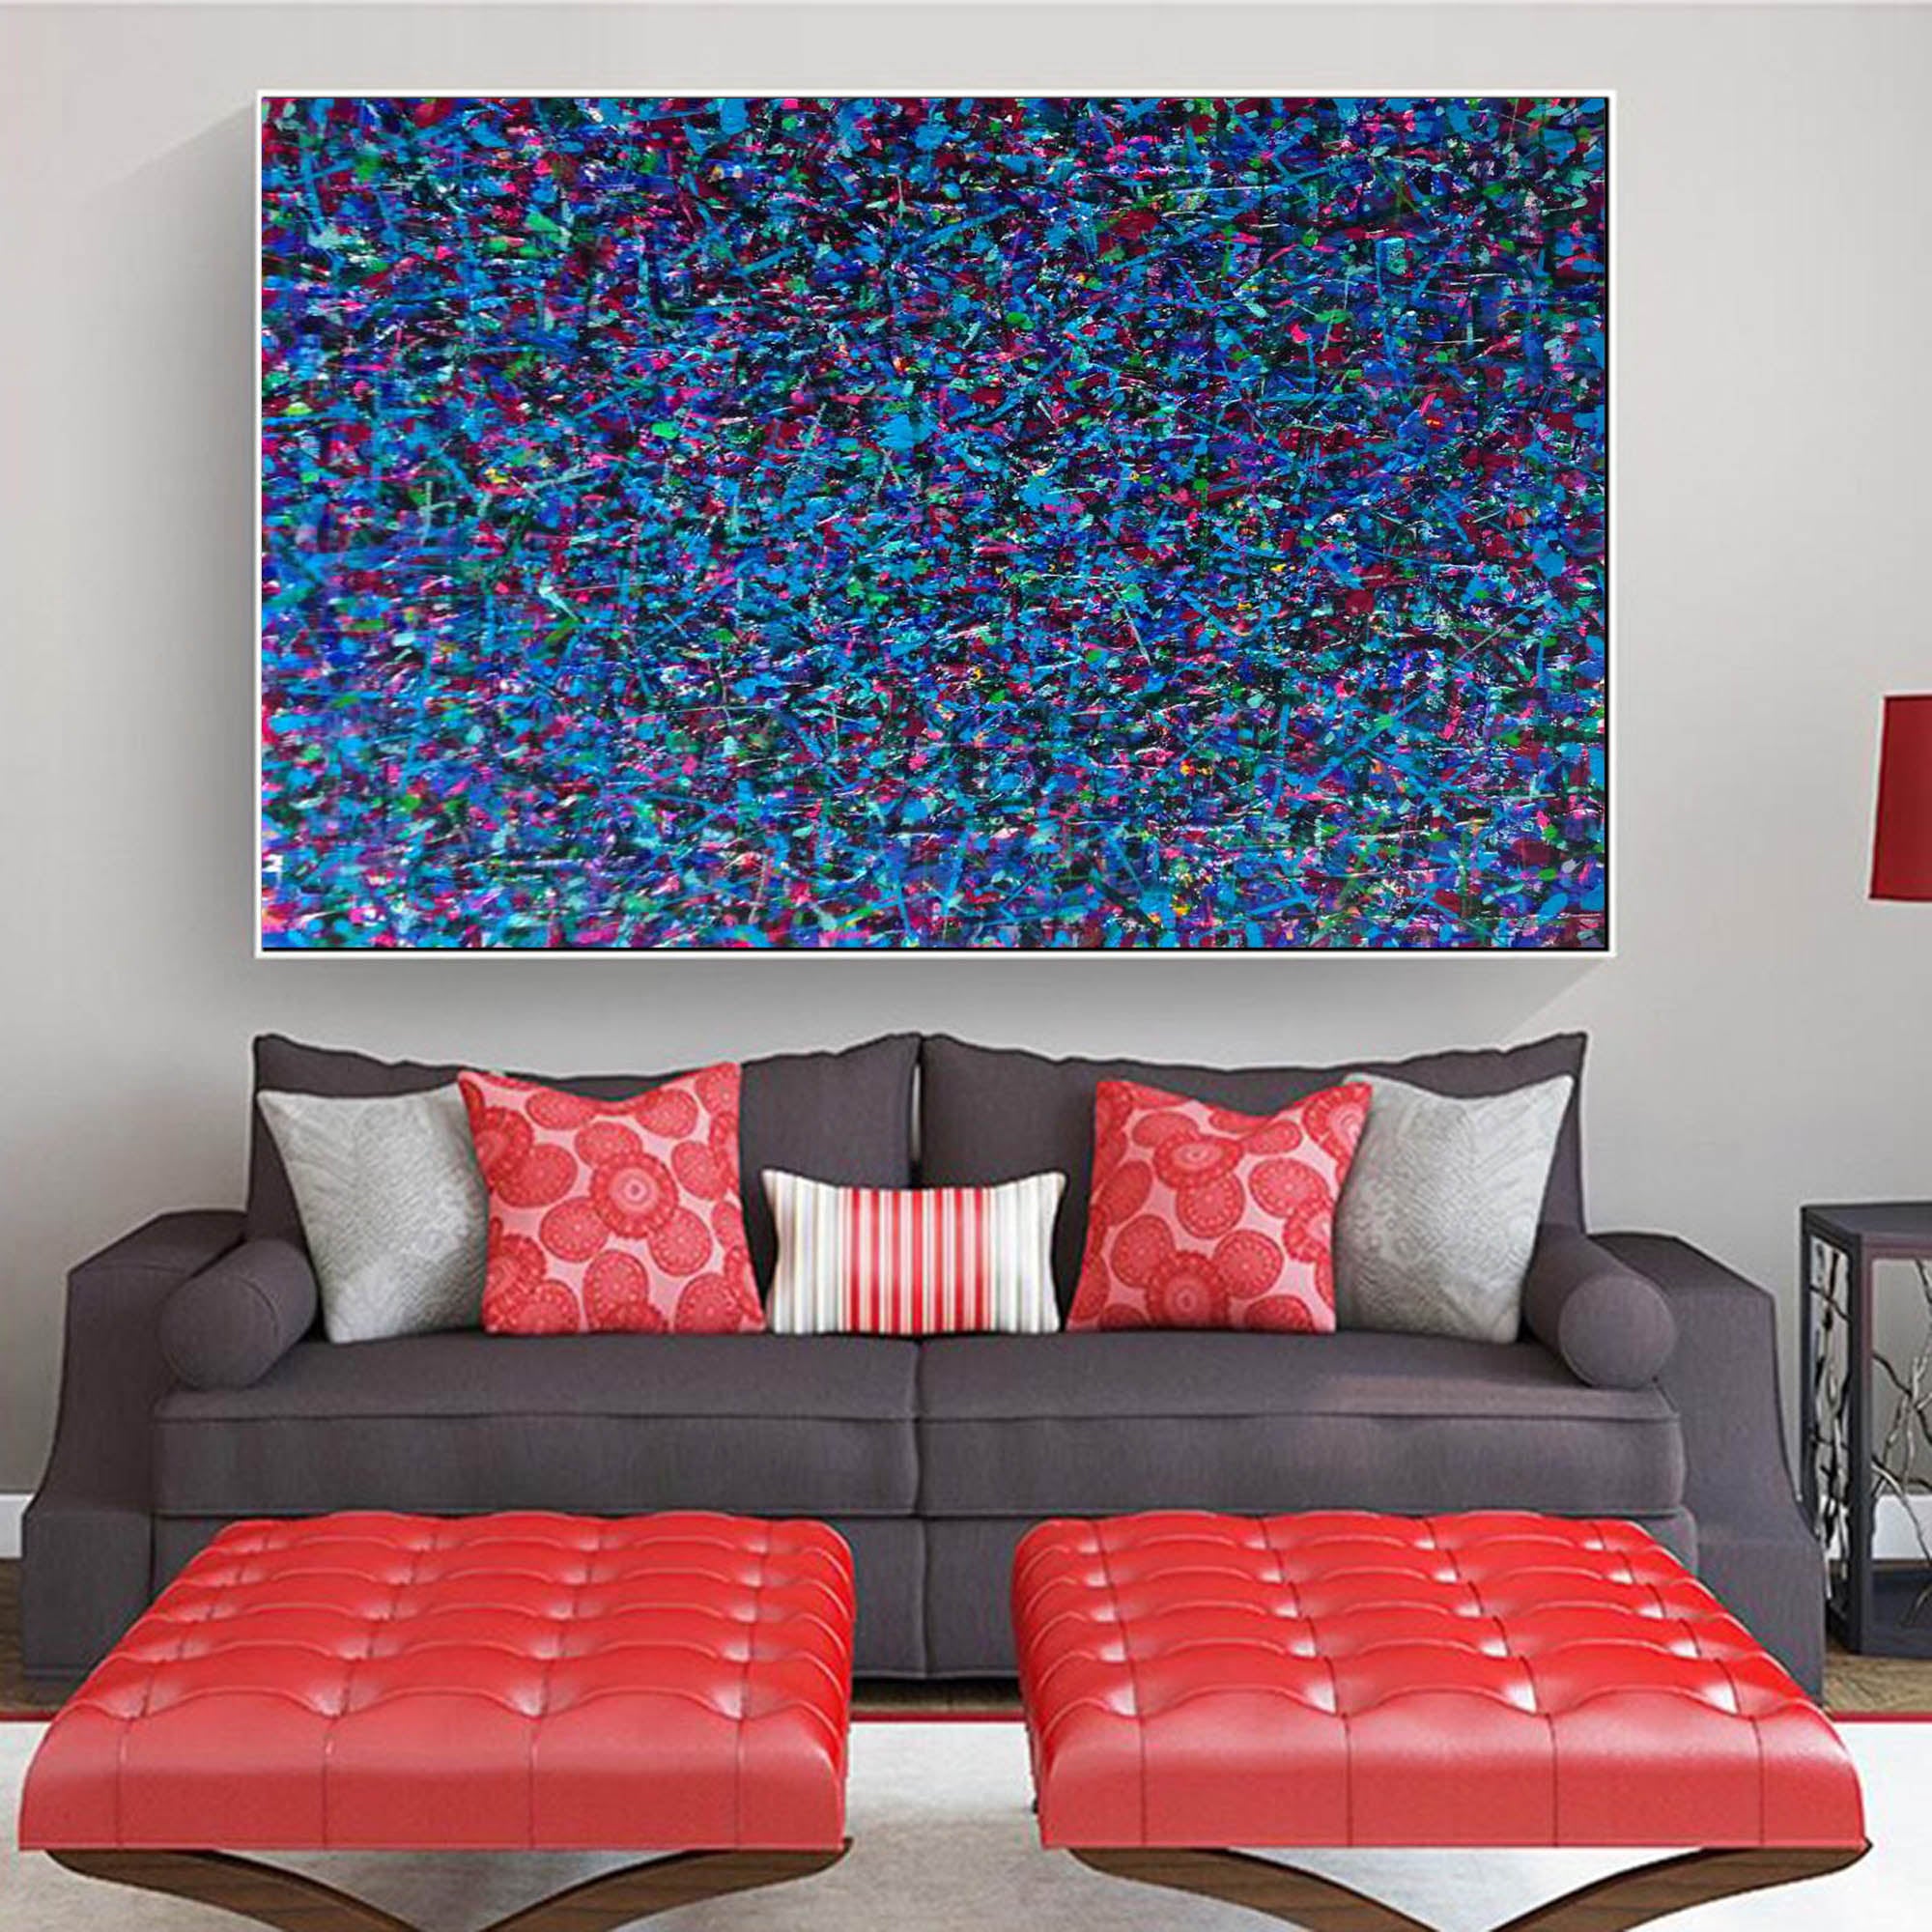 Large canvas art for living room, Oversized oil painting